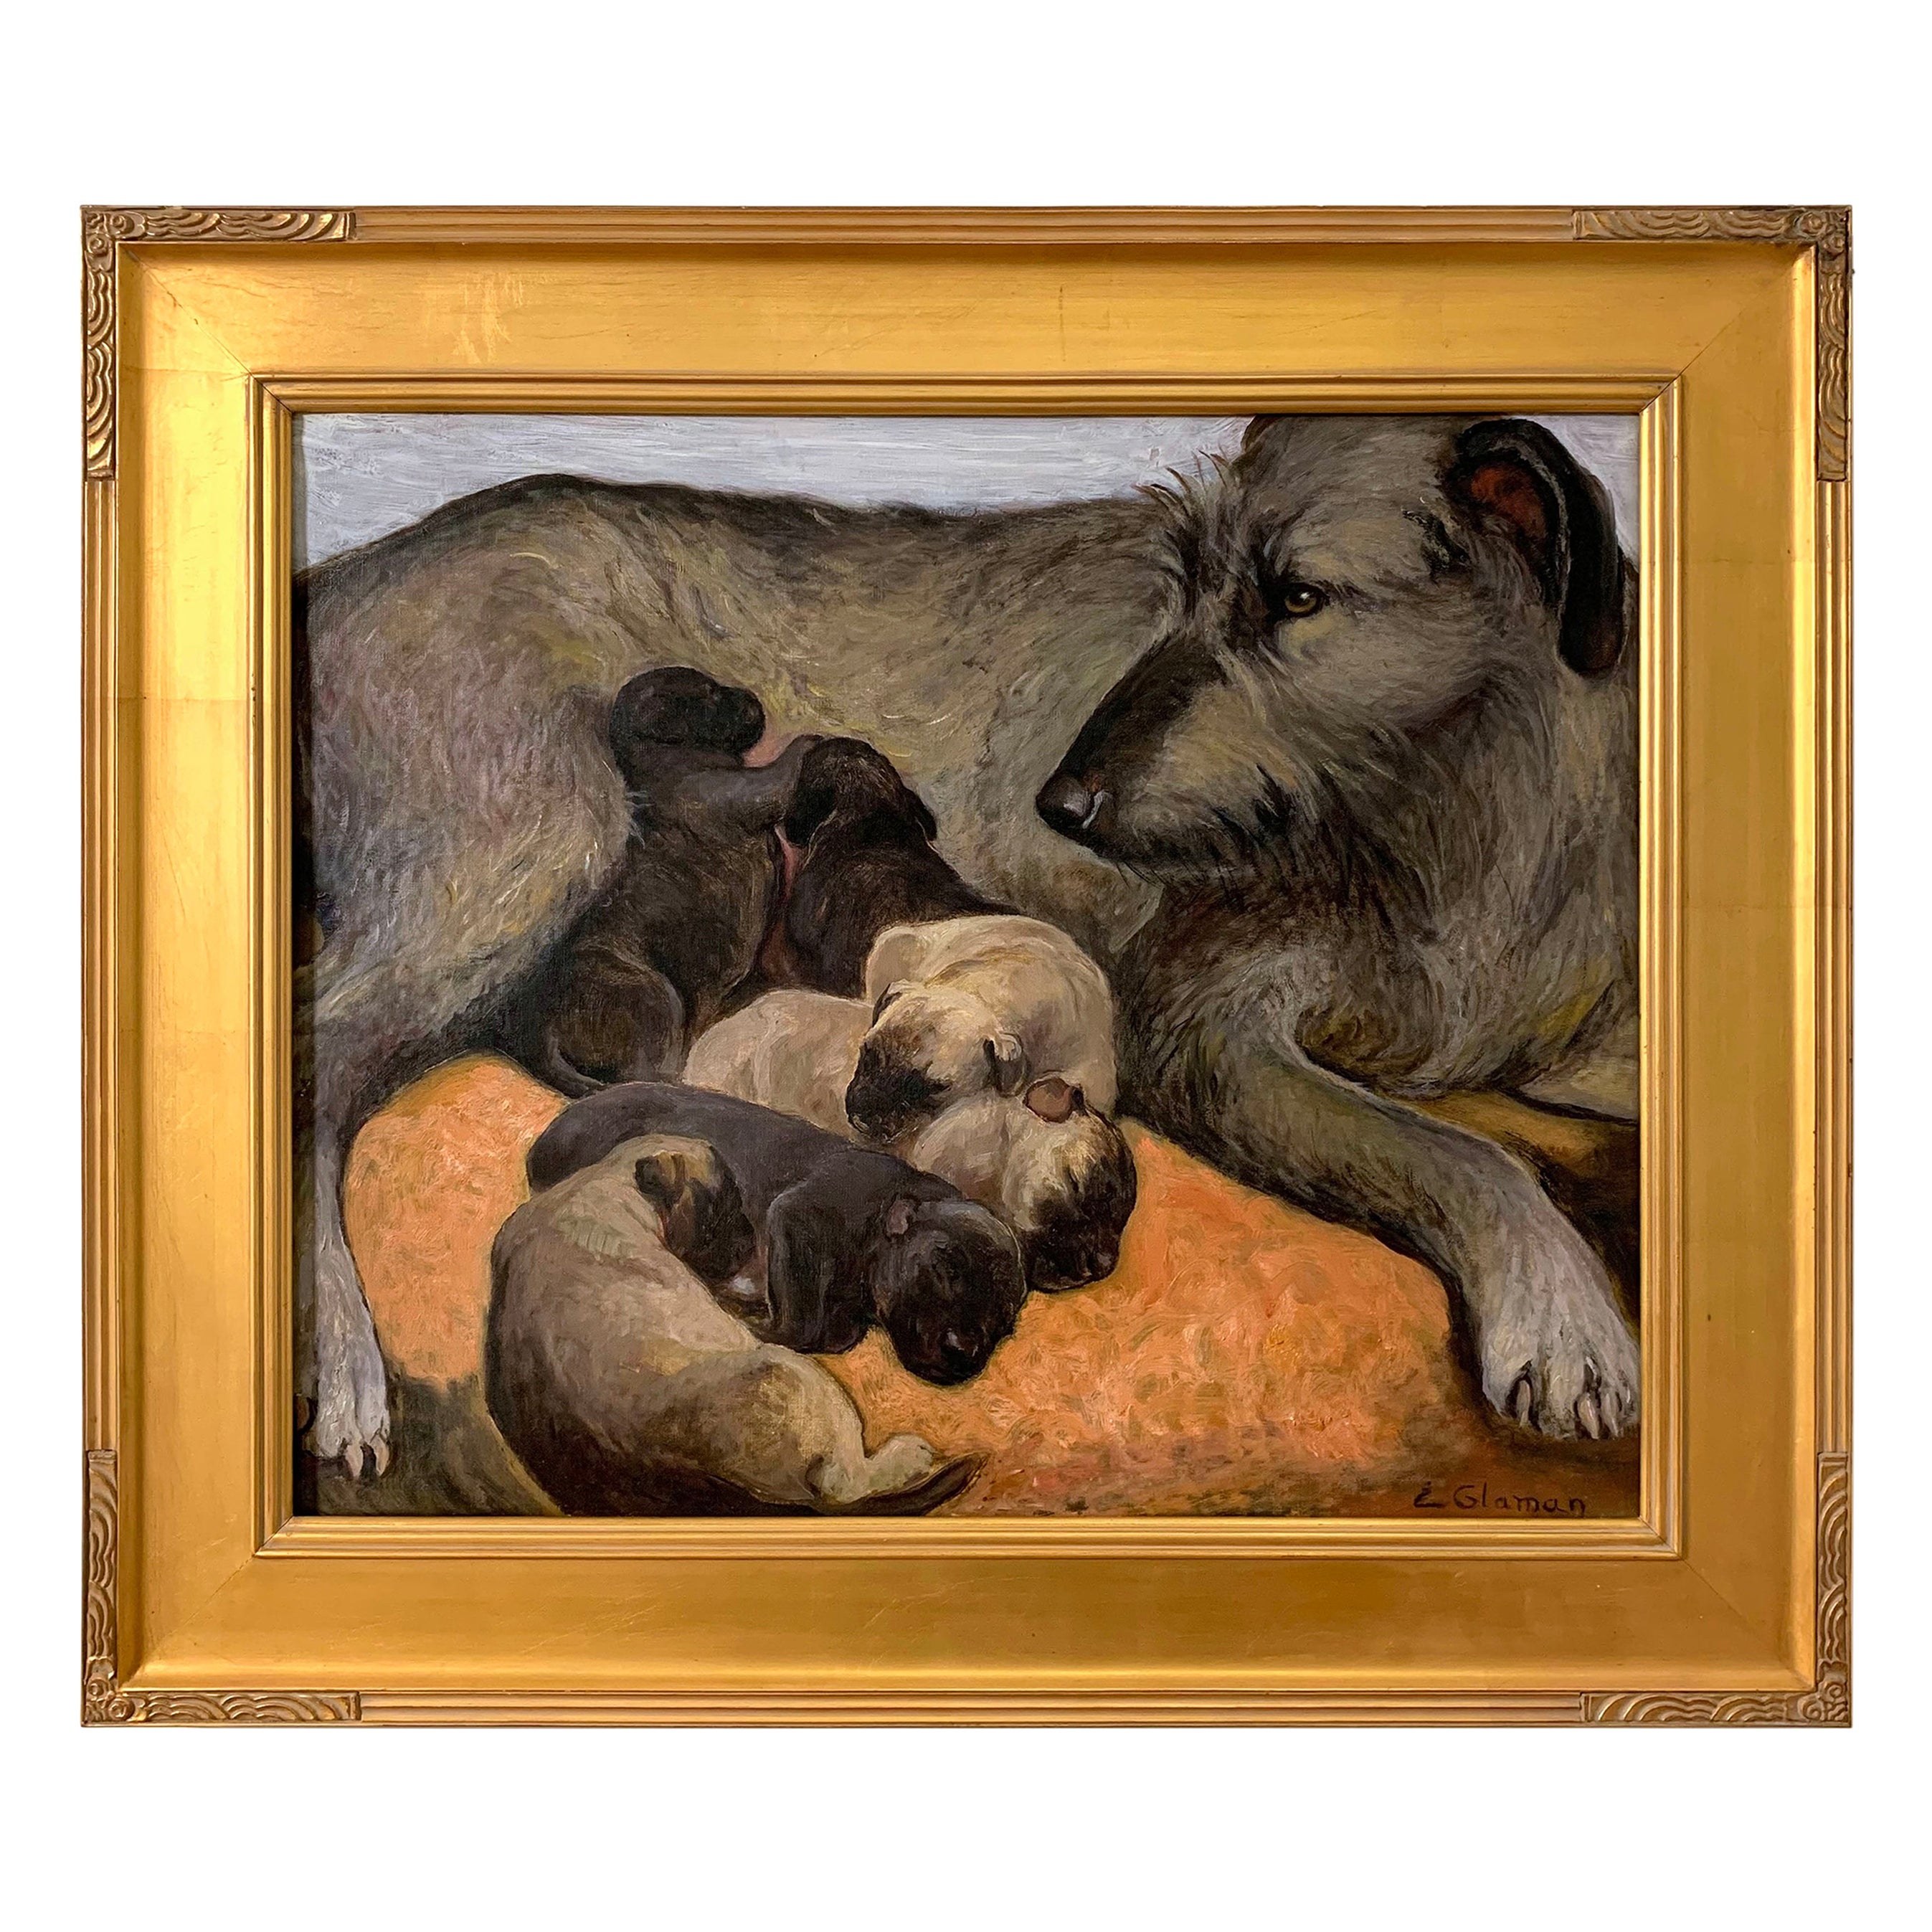 Eugenie Fish Glaman WPA Era Painting of Mother Dog and Pups